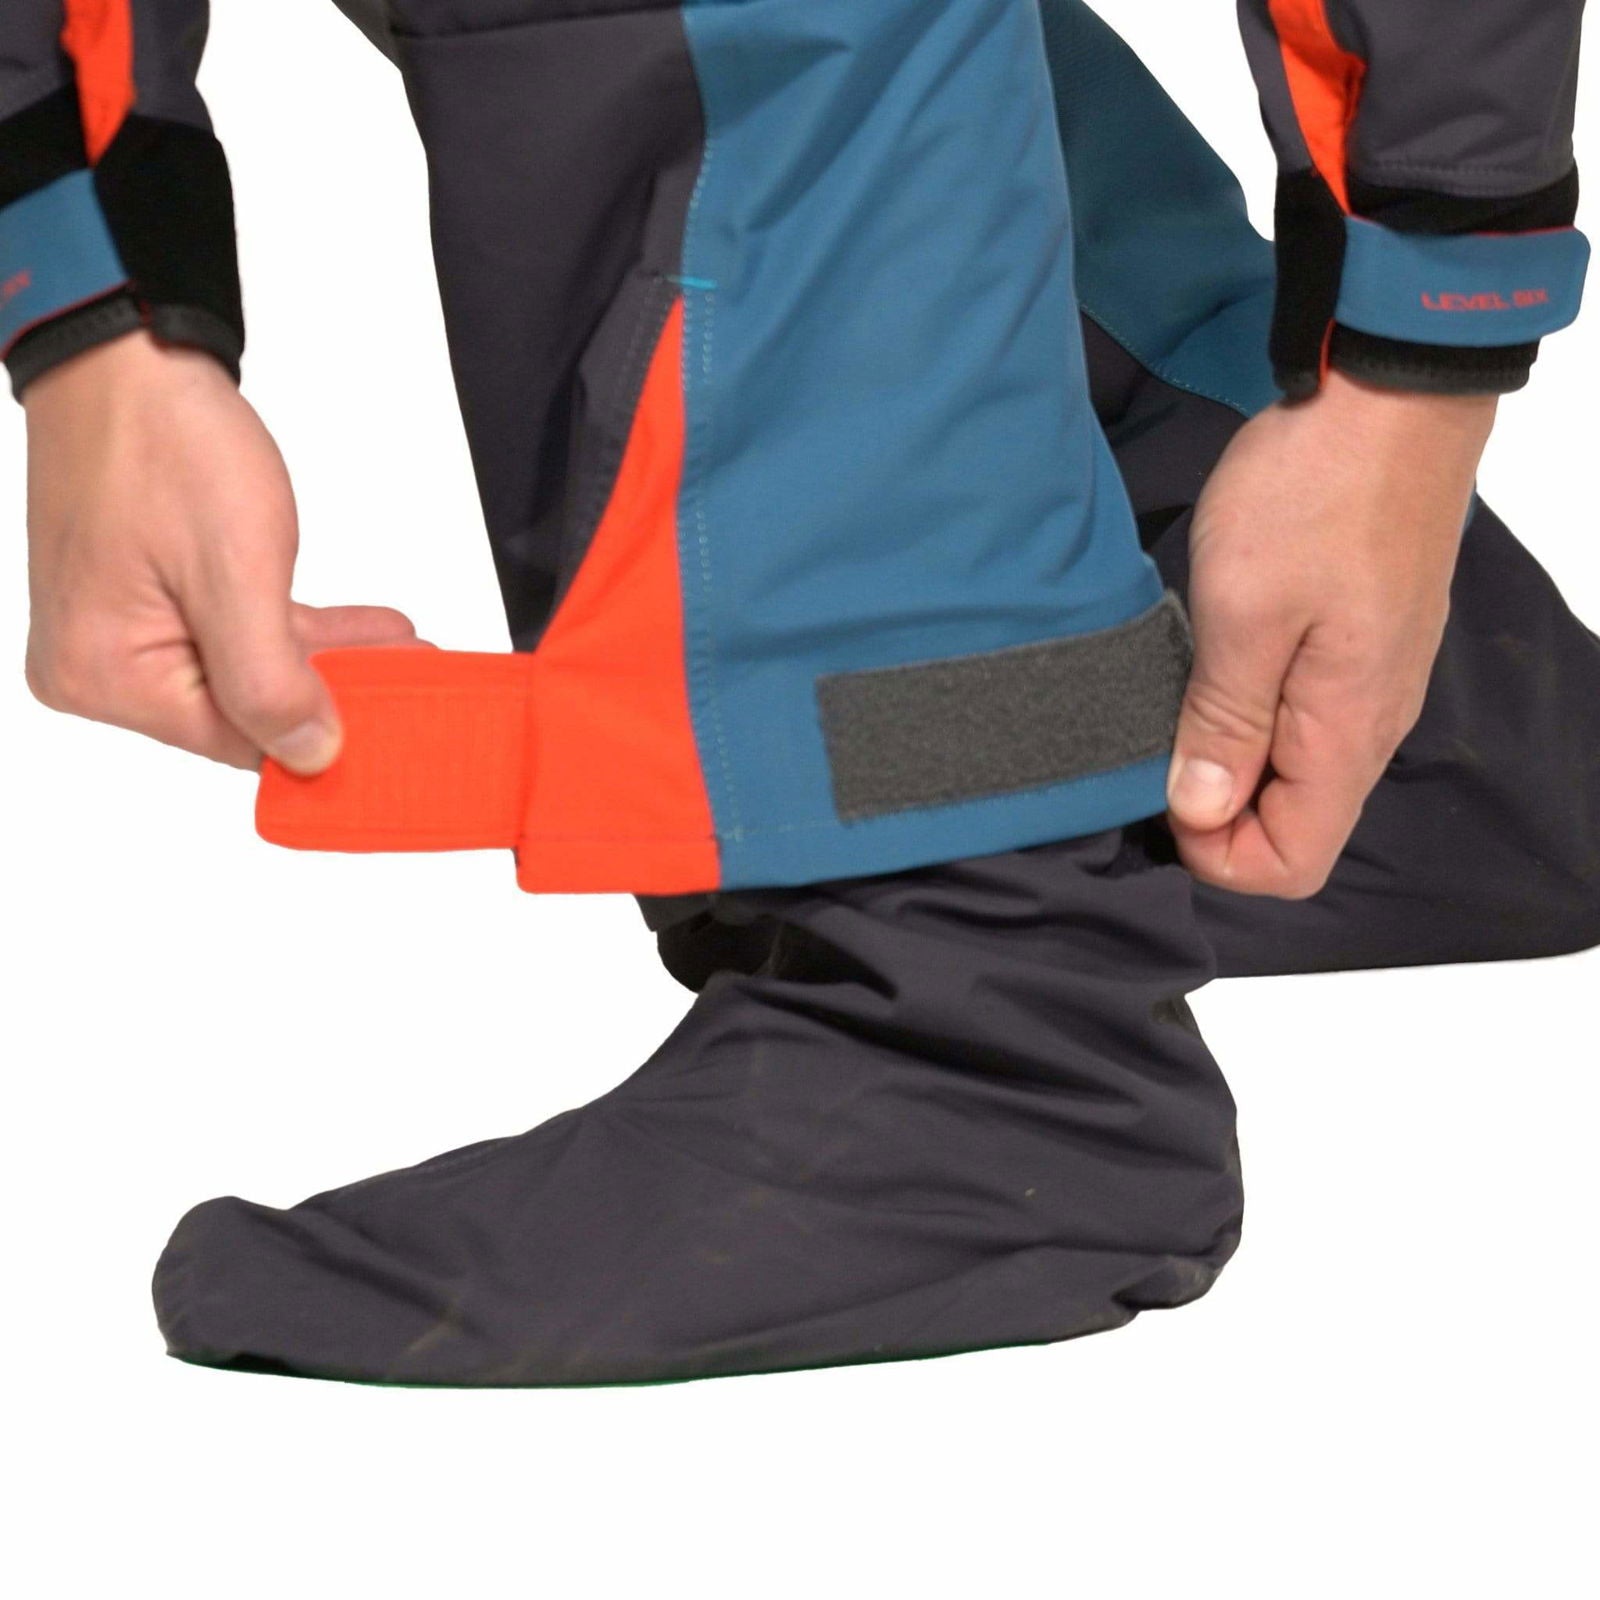   Odin Dry Suit  BestCoast Outfitters 